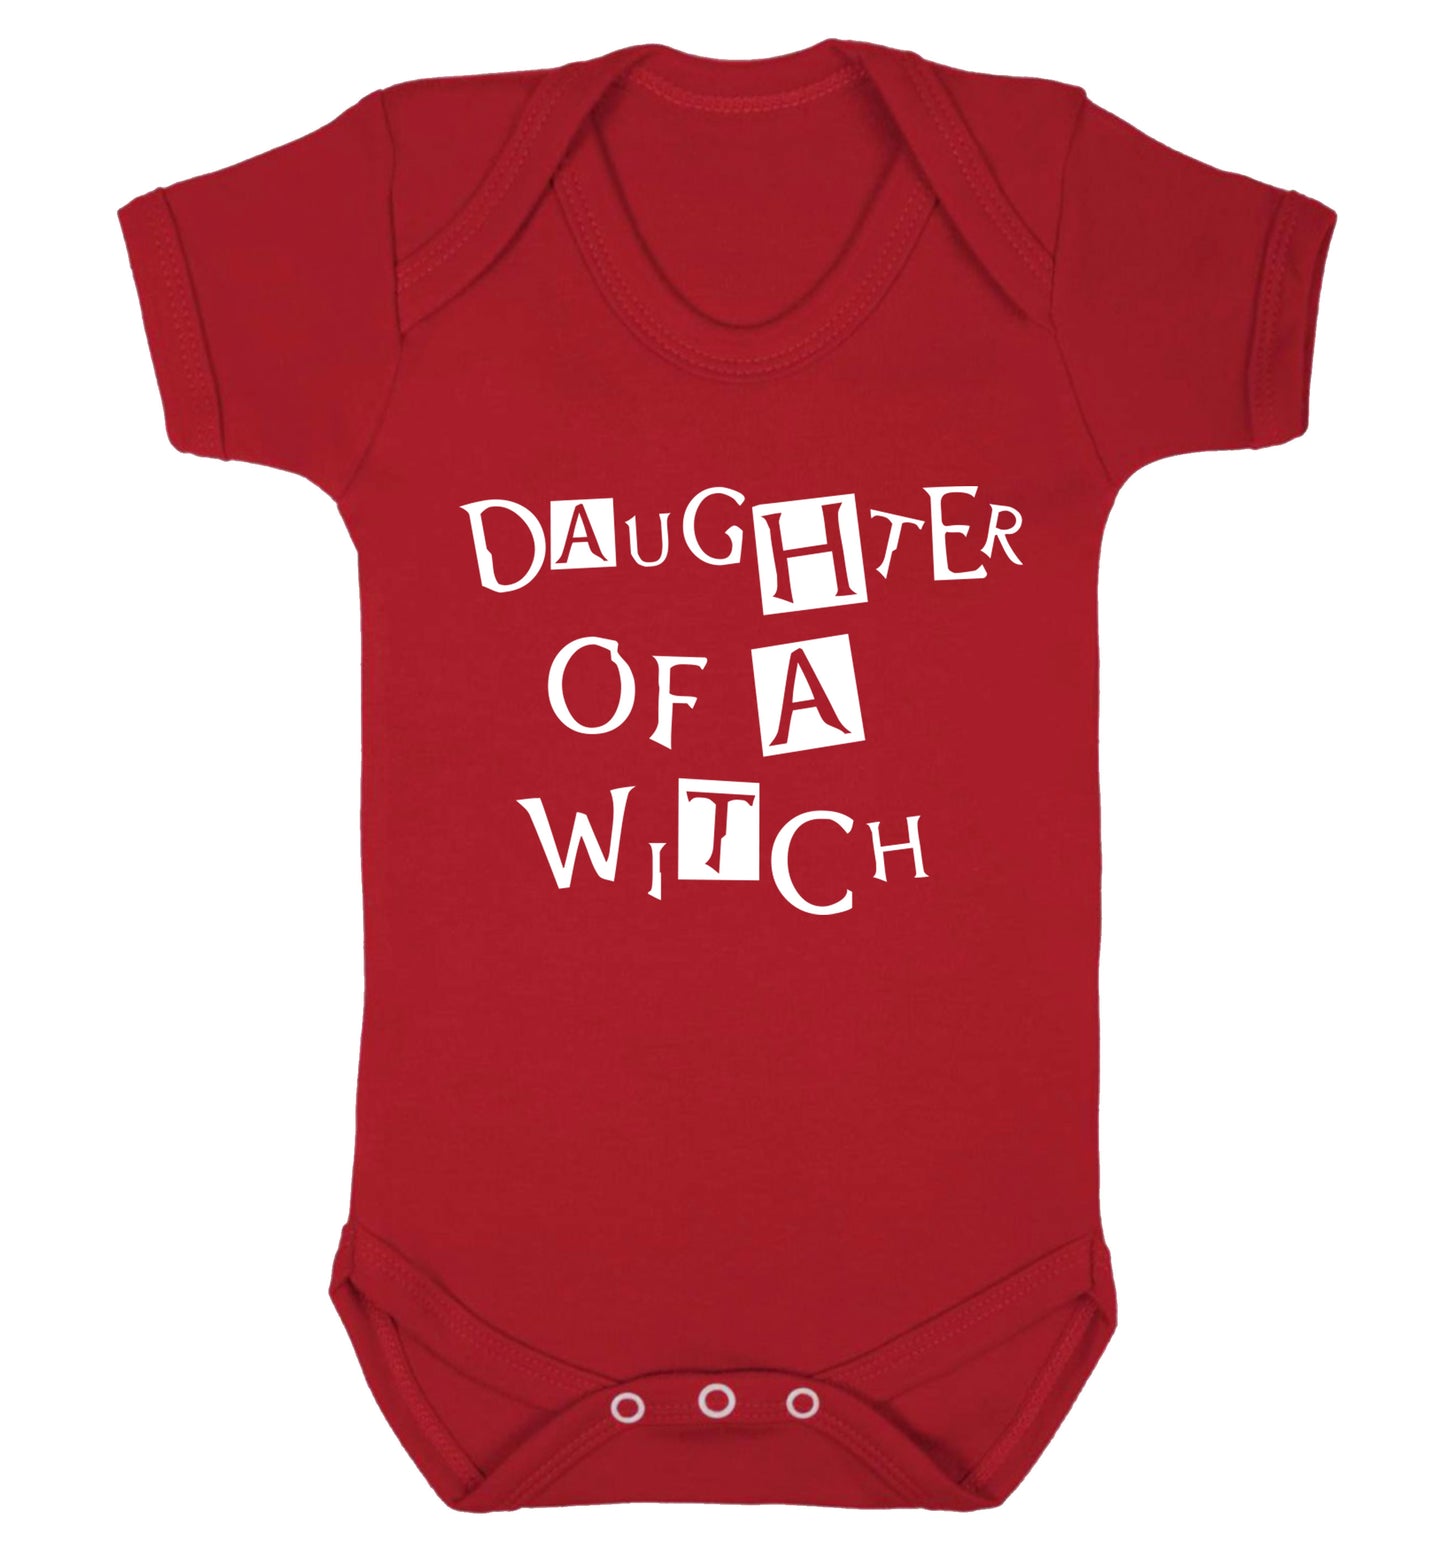 Daughter of a witch Baby Vest red 18-24 months